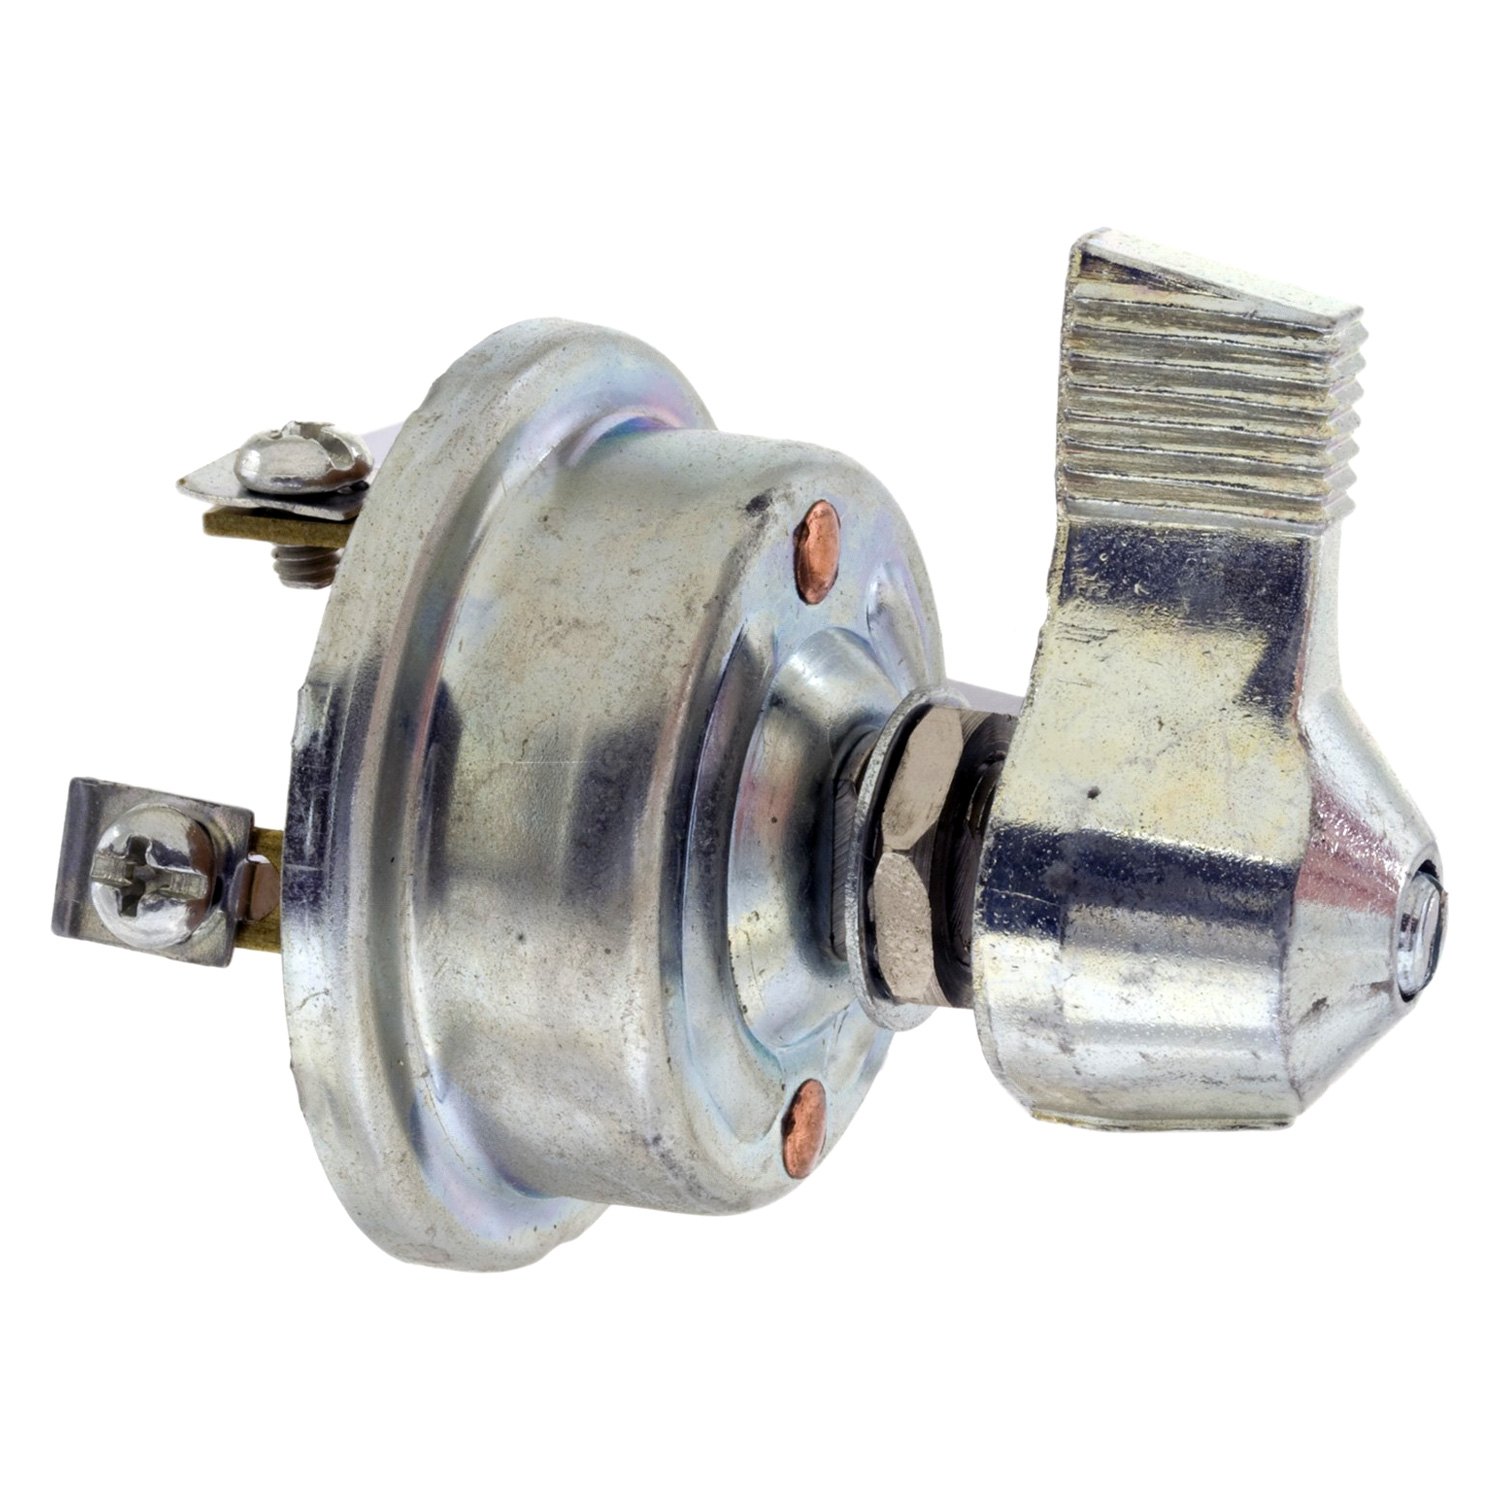 WVE by NTK 1S6513 Ignition Switch 